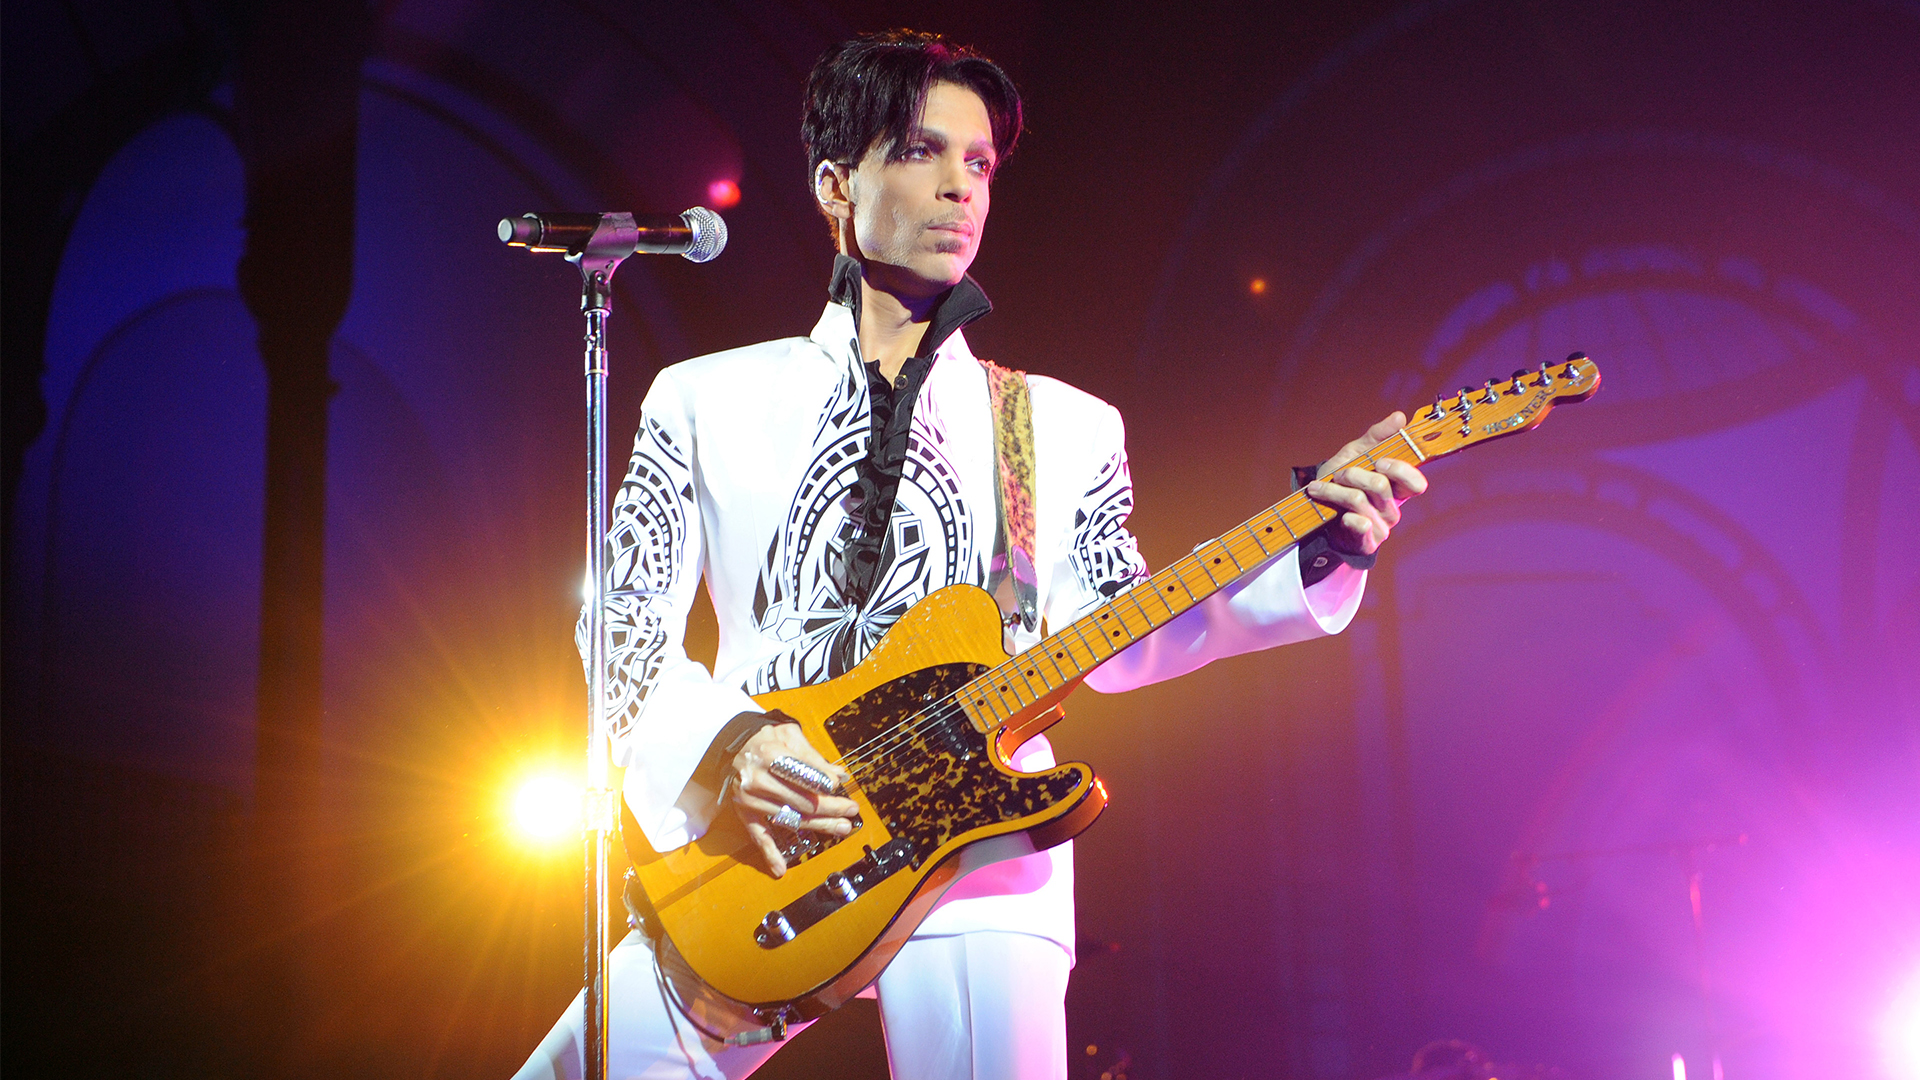 Inside Why Prince Changed His Name As A Way To Get Ownership Of His Music